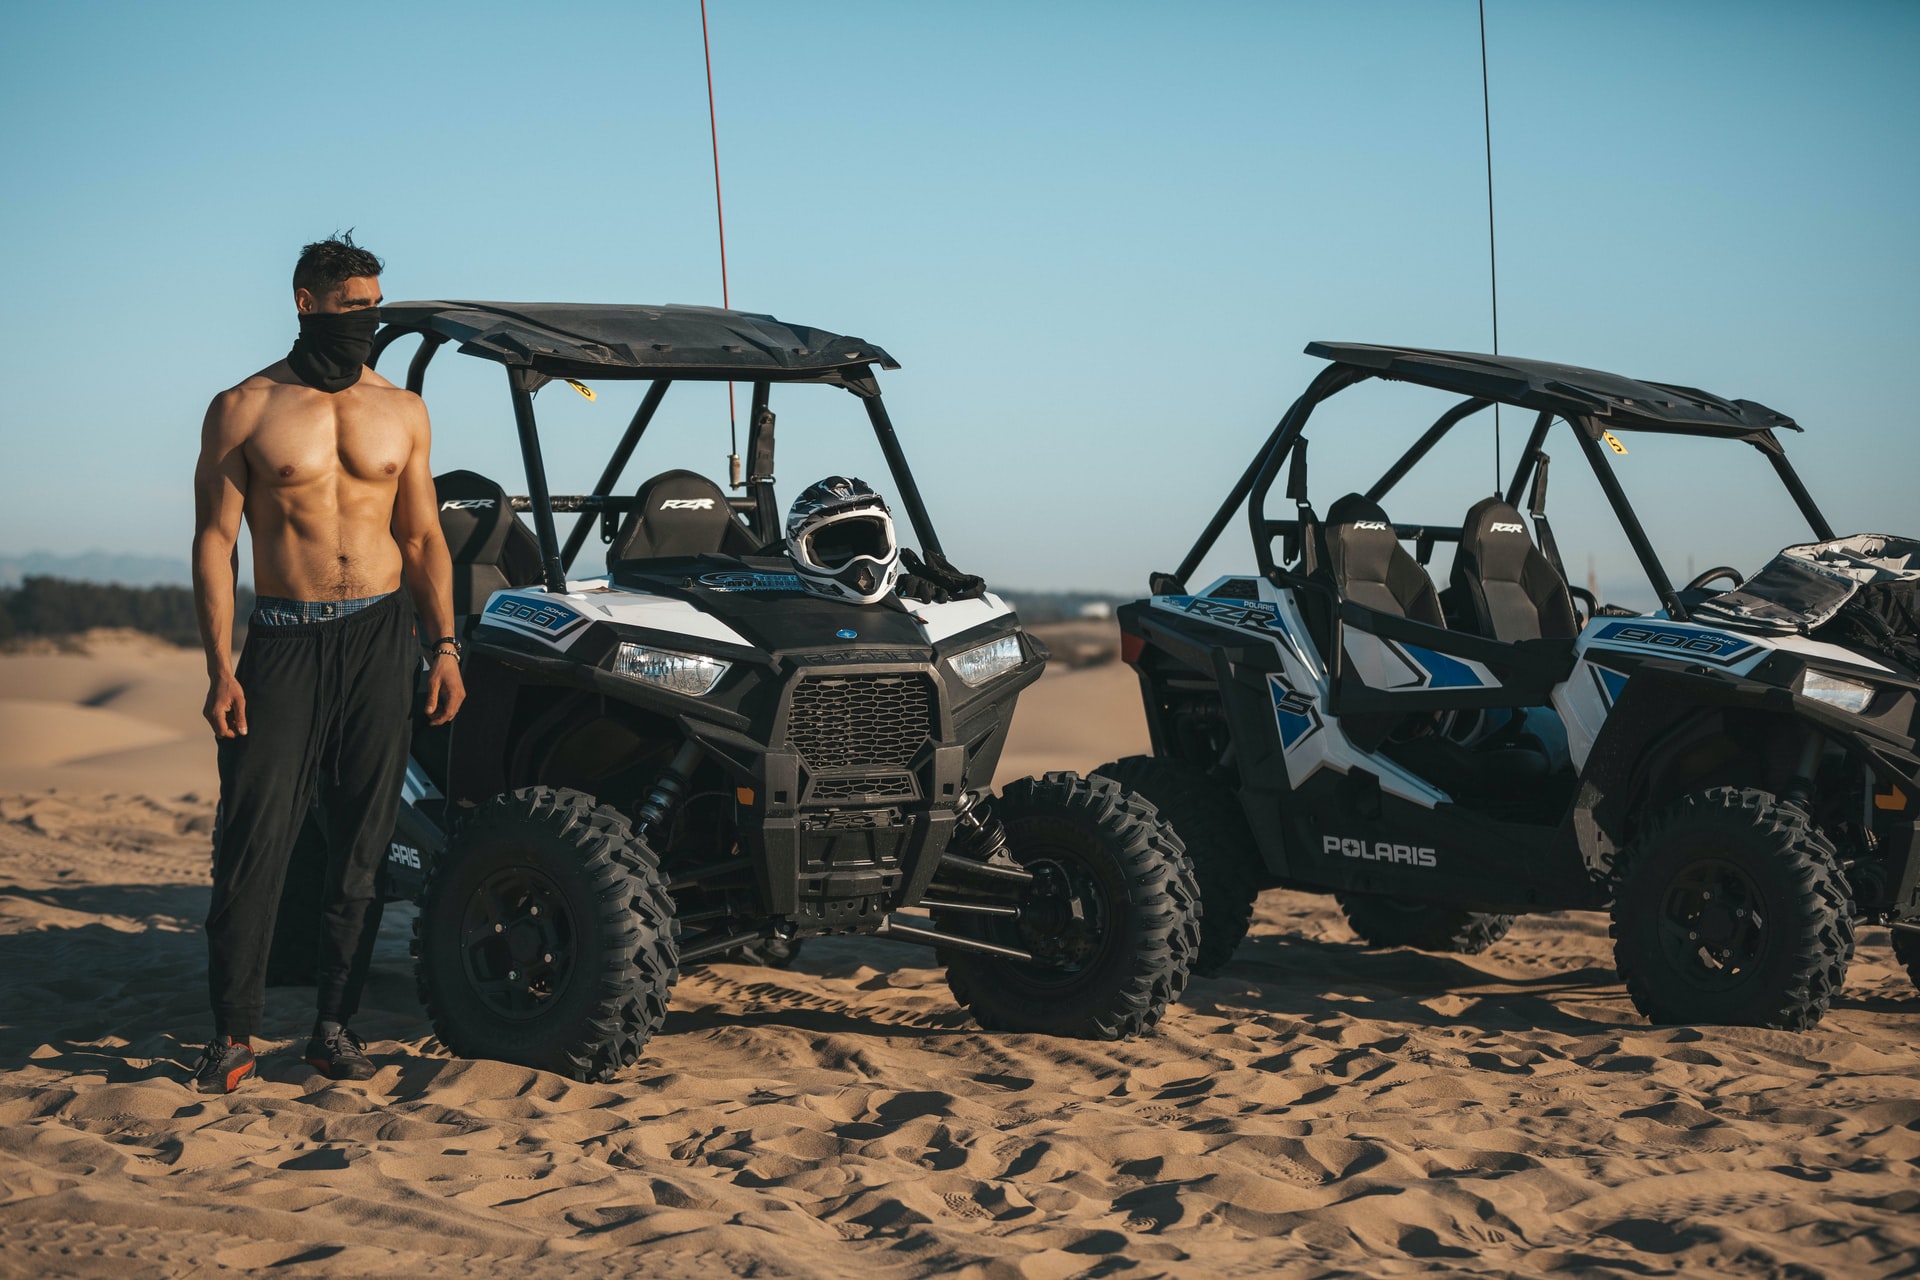 How Much Does the Polaris RZR Weigh?